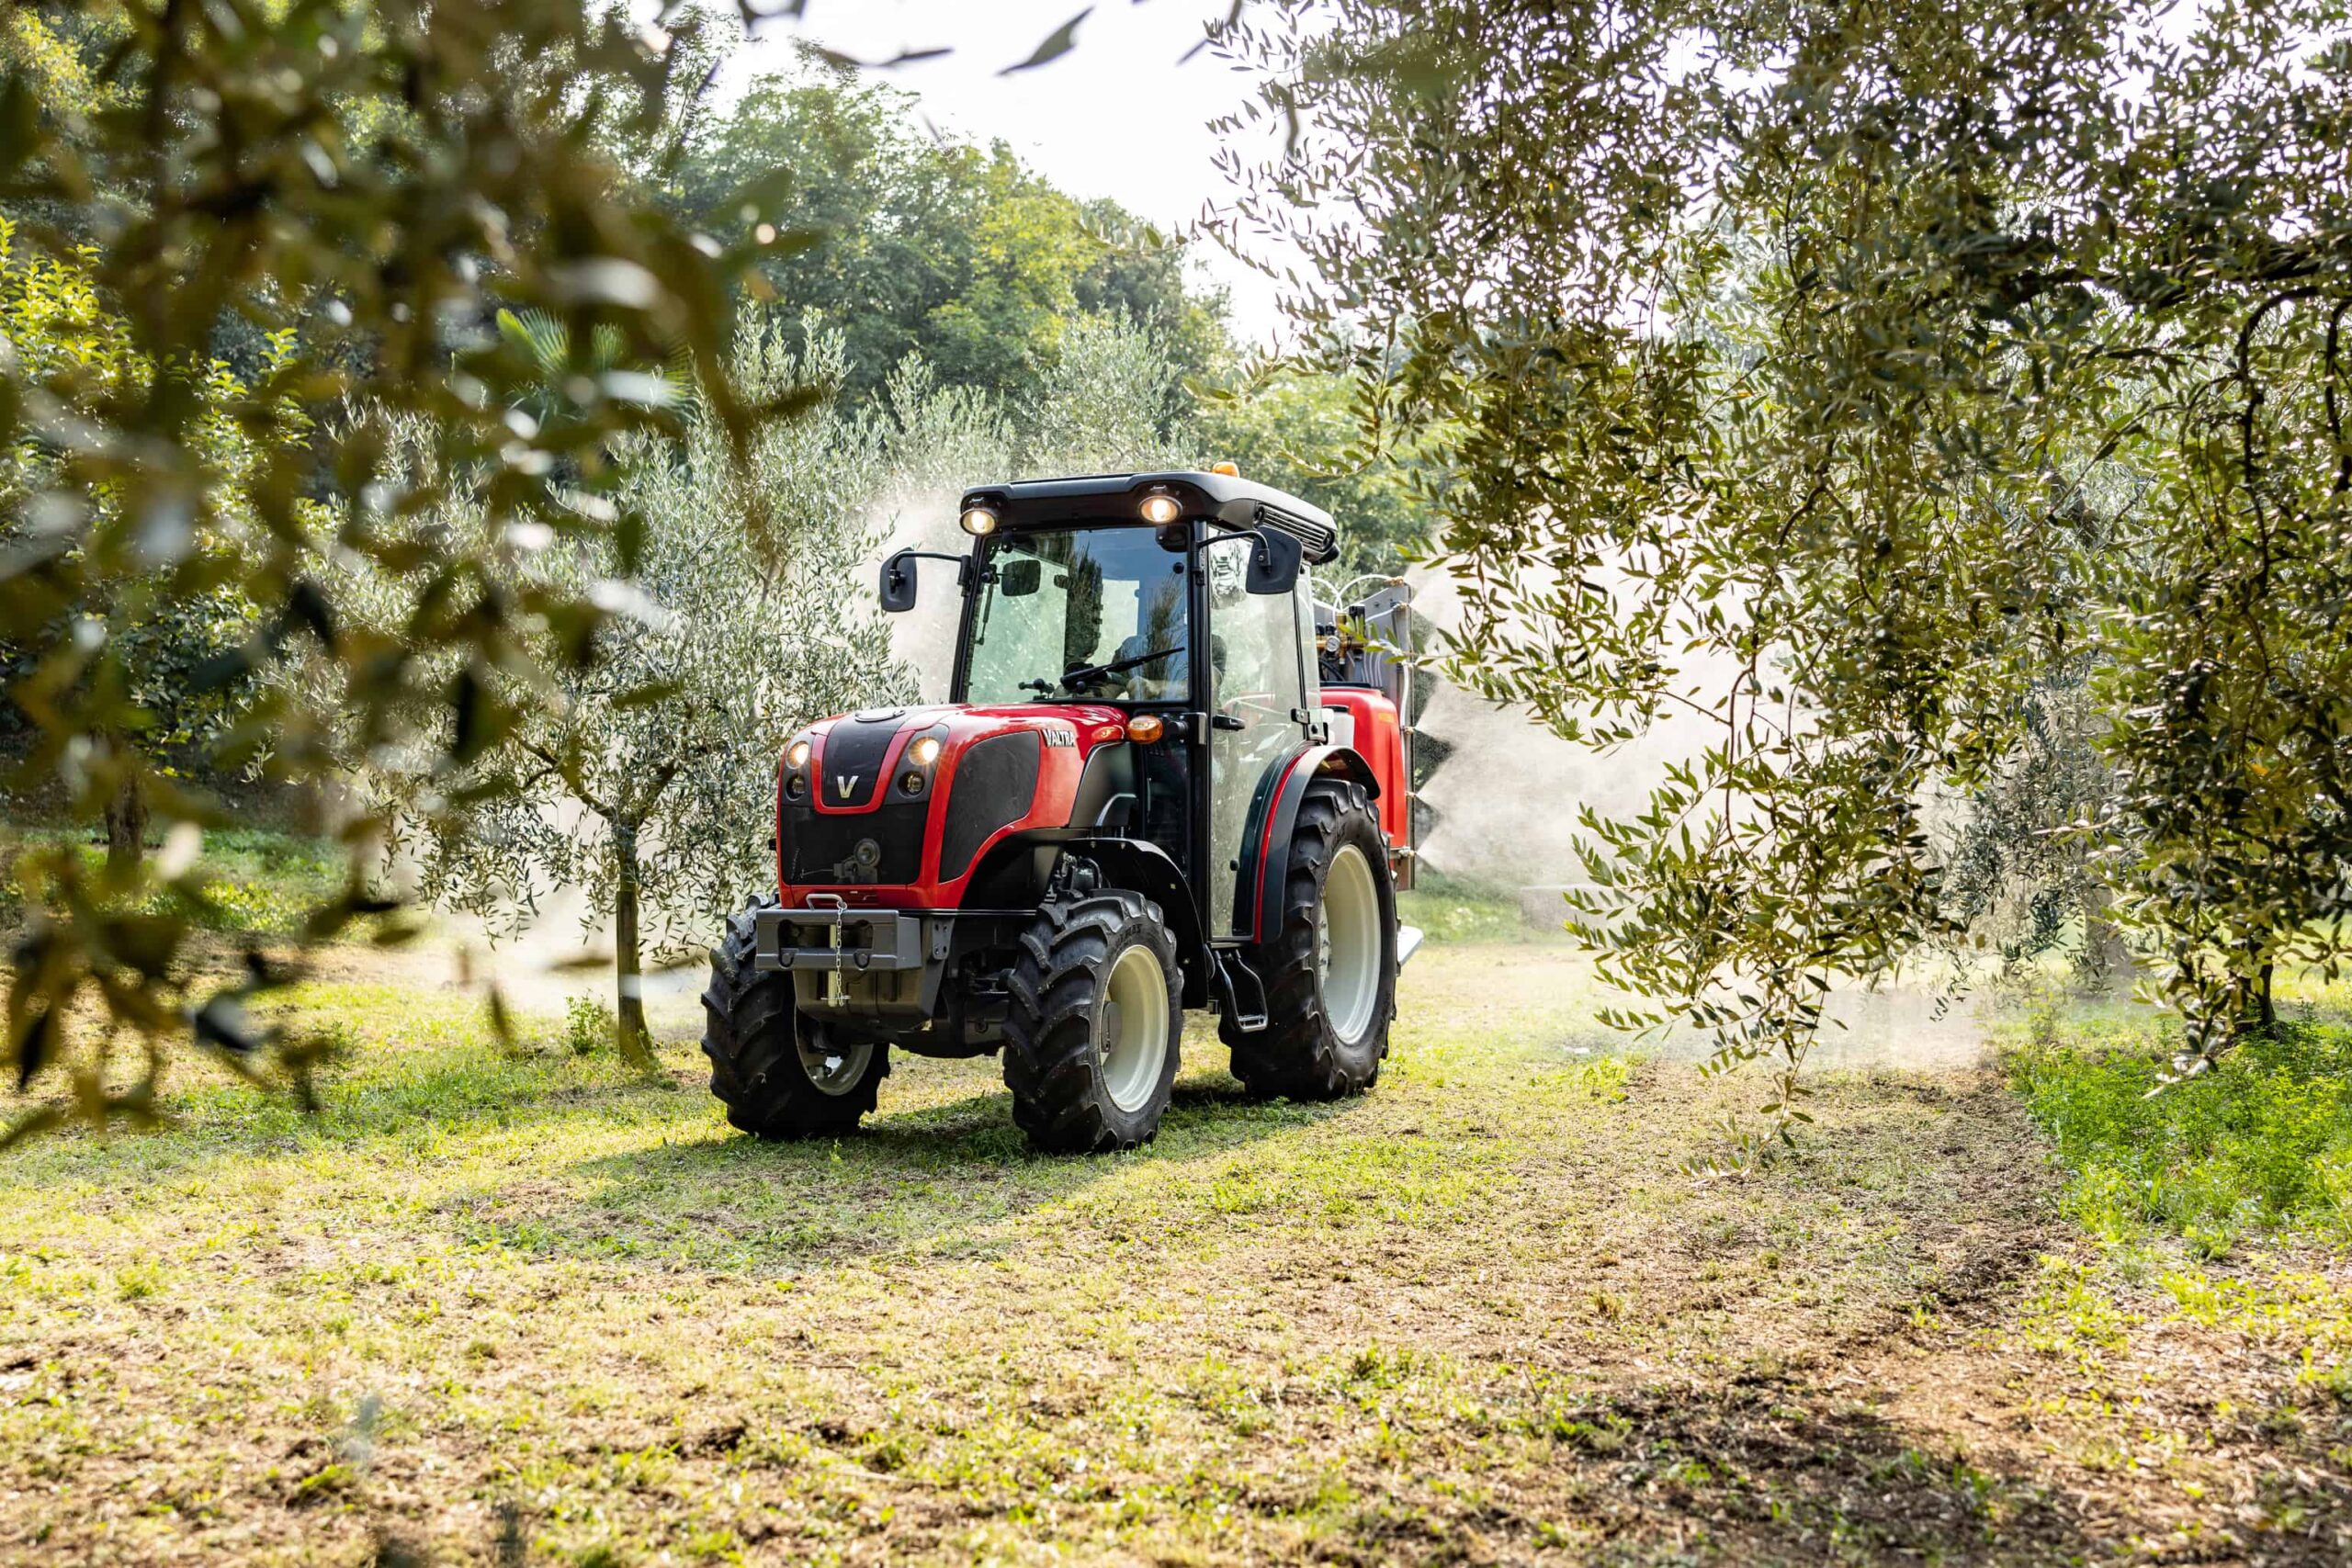 Valtra introduces new F Series vineyard and orchard tractors